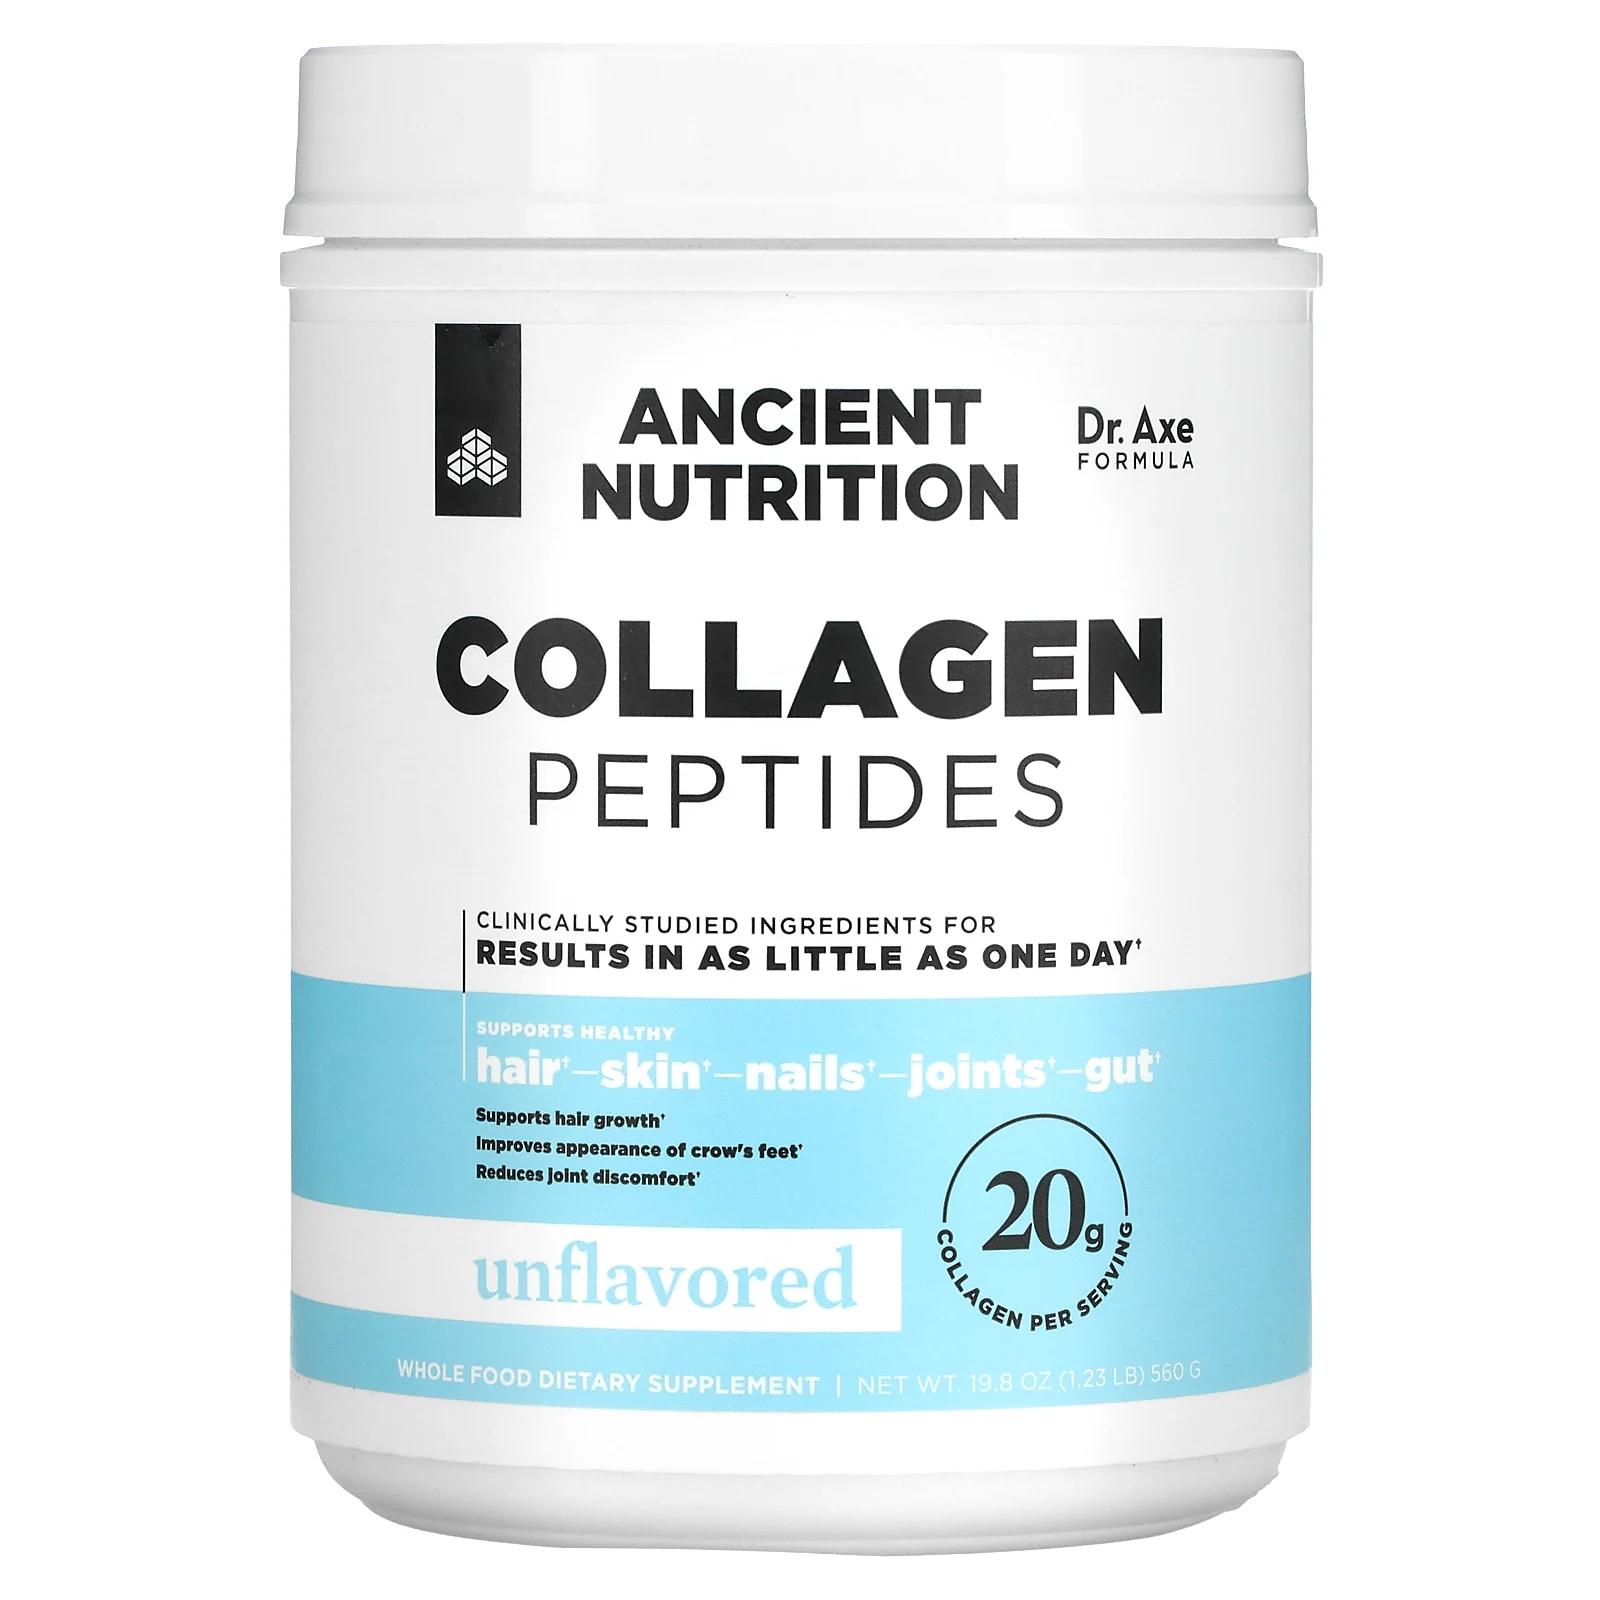 Dr. Axe / Ancient Nutrition Collagen Peptides Unflavored 19.8 oz (560 g) dr axe ancient nutrition multi collagen protein strawberry lemonade 1 18 lbs 535 5 g